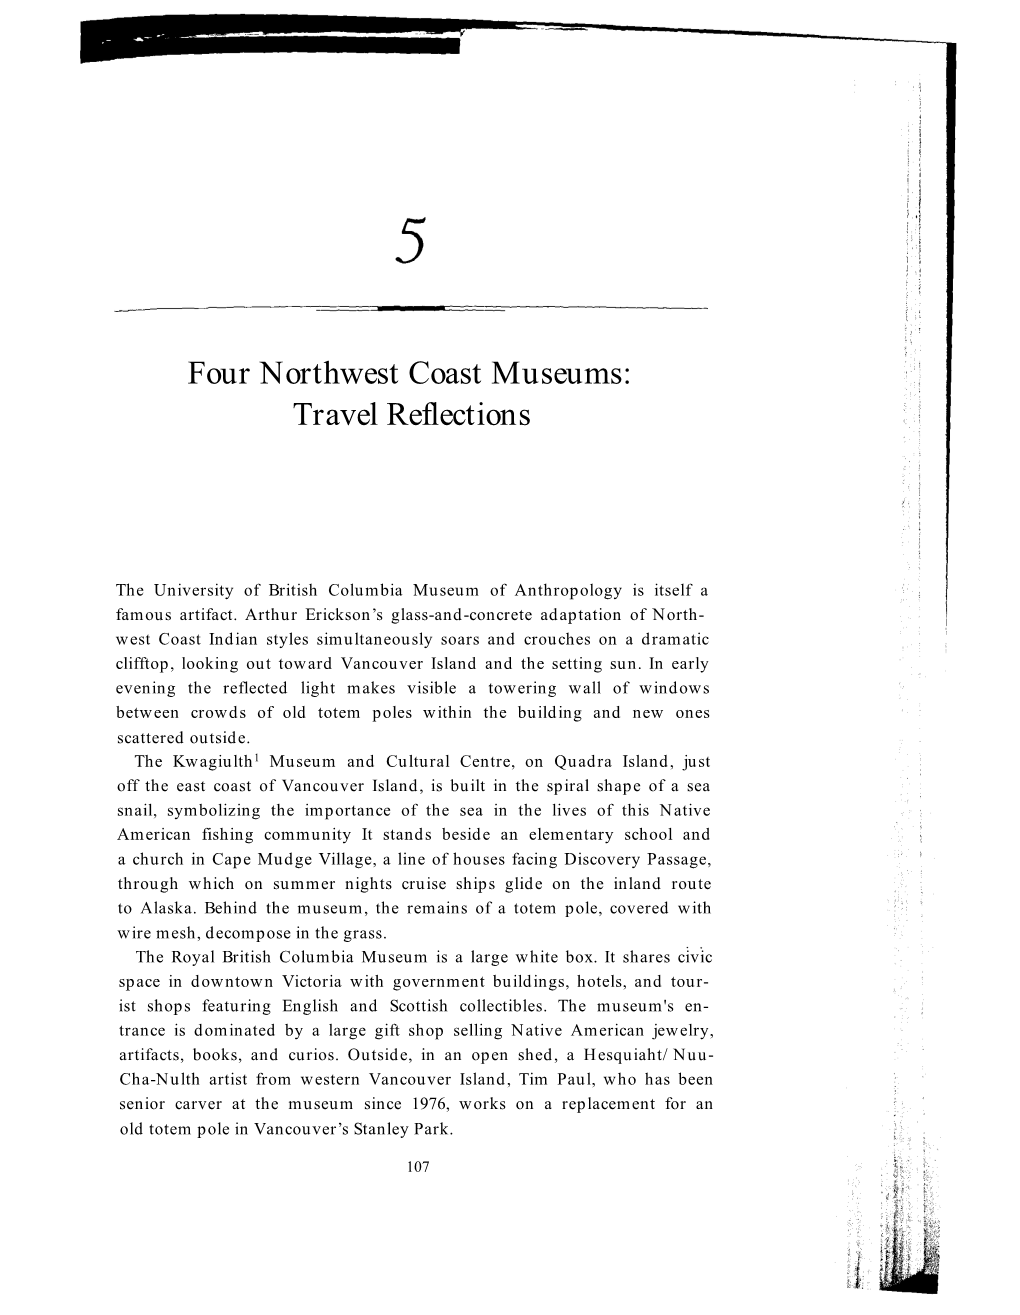 Four Northwest Coast Museums: Travel Reflections